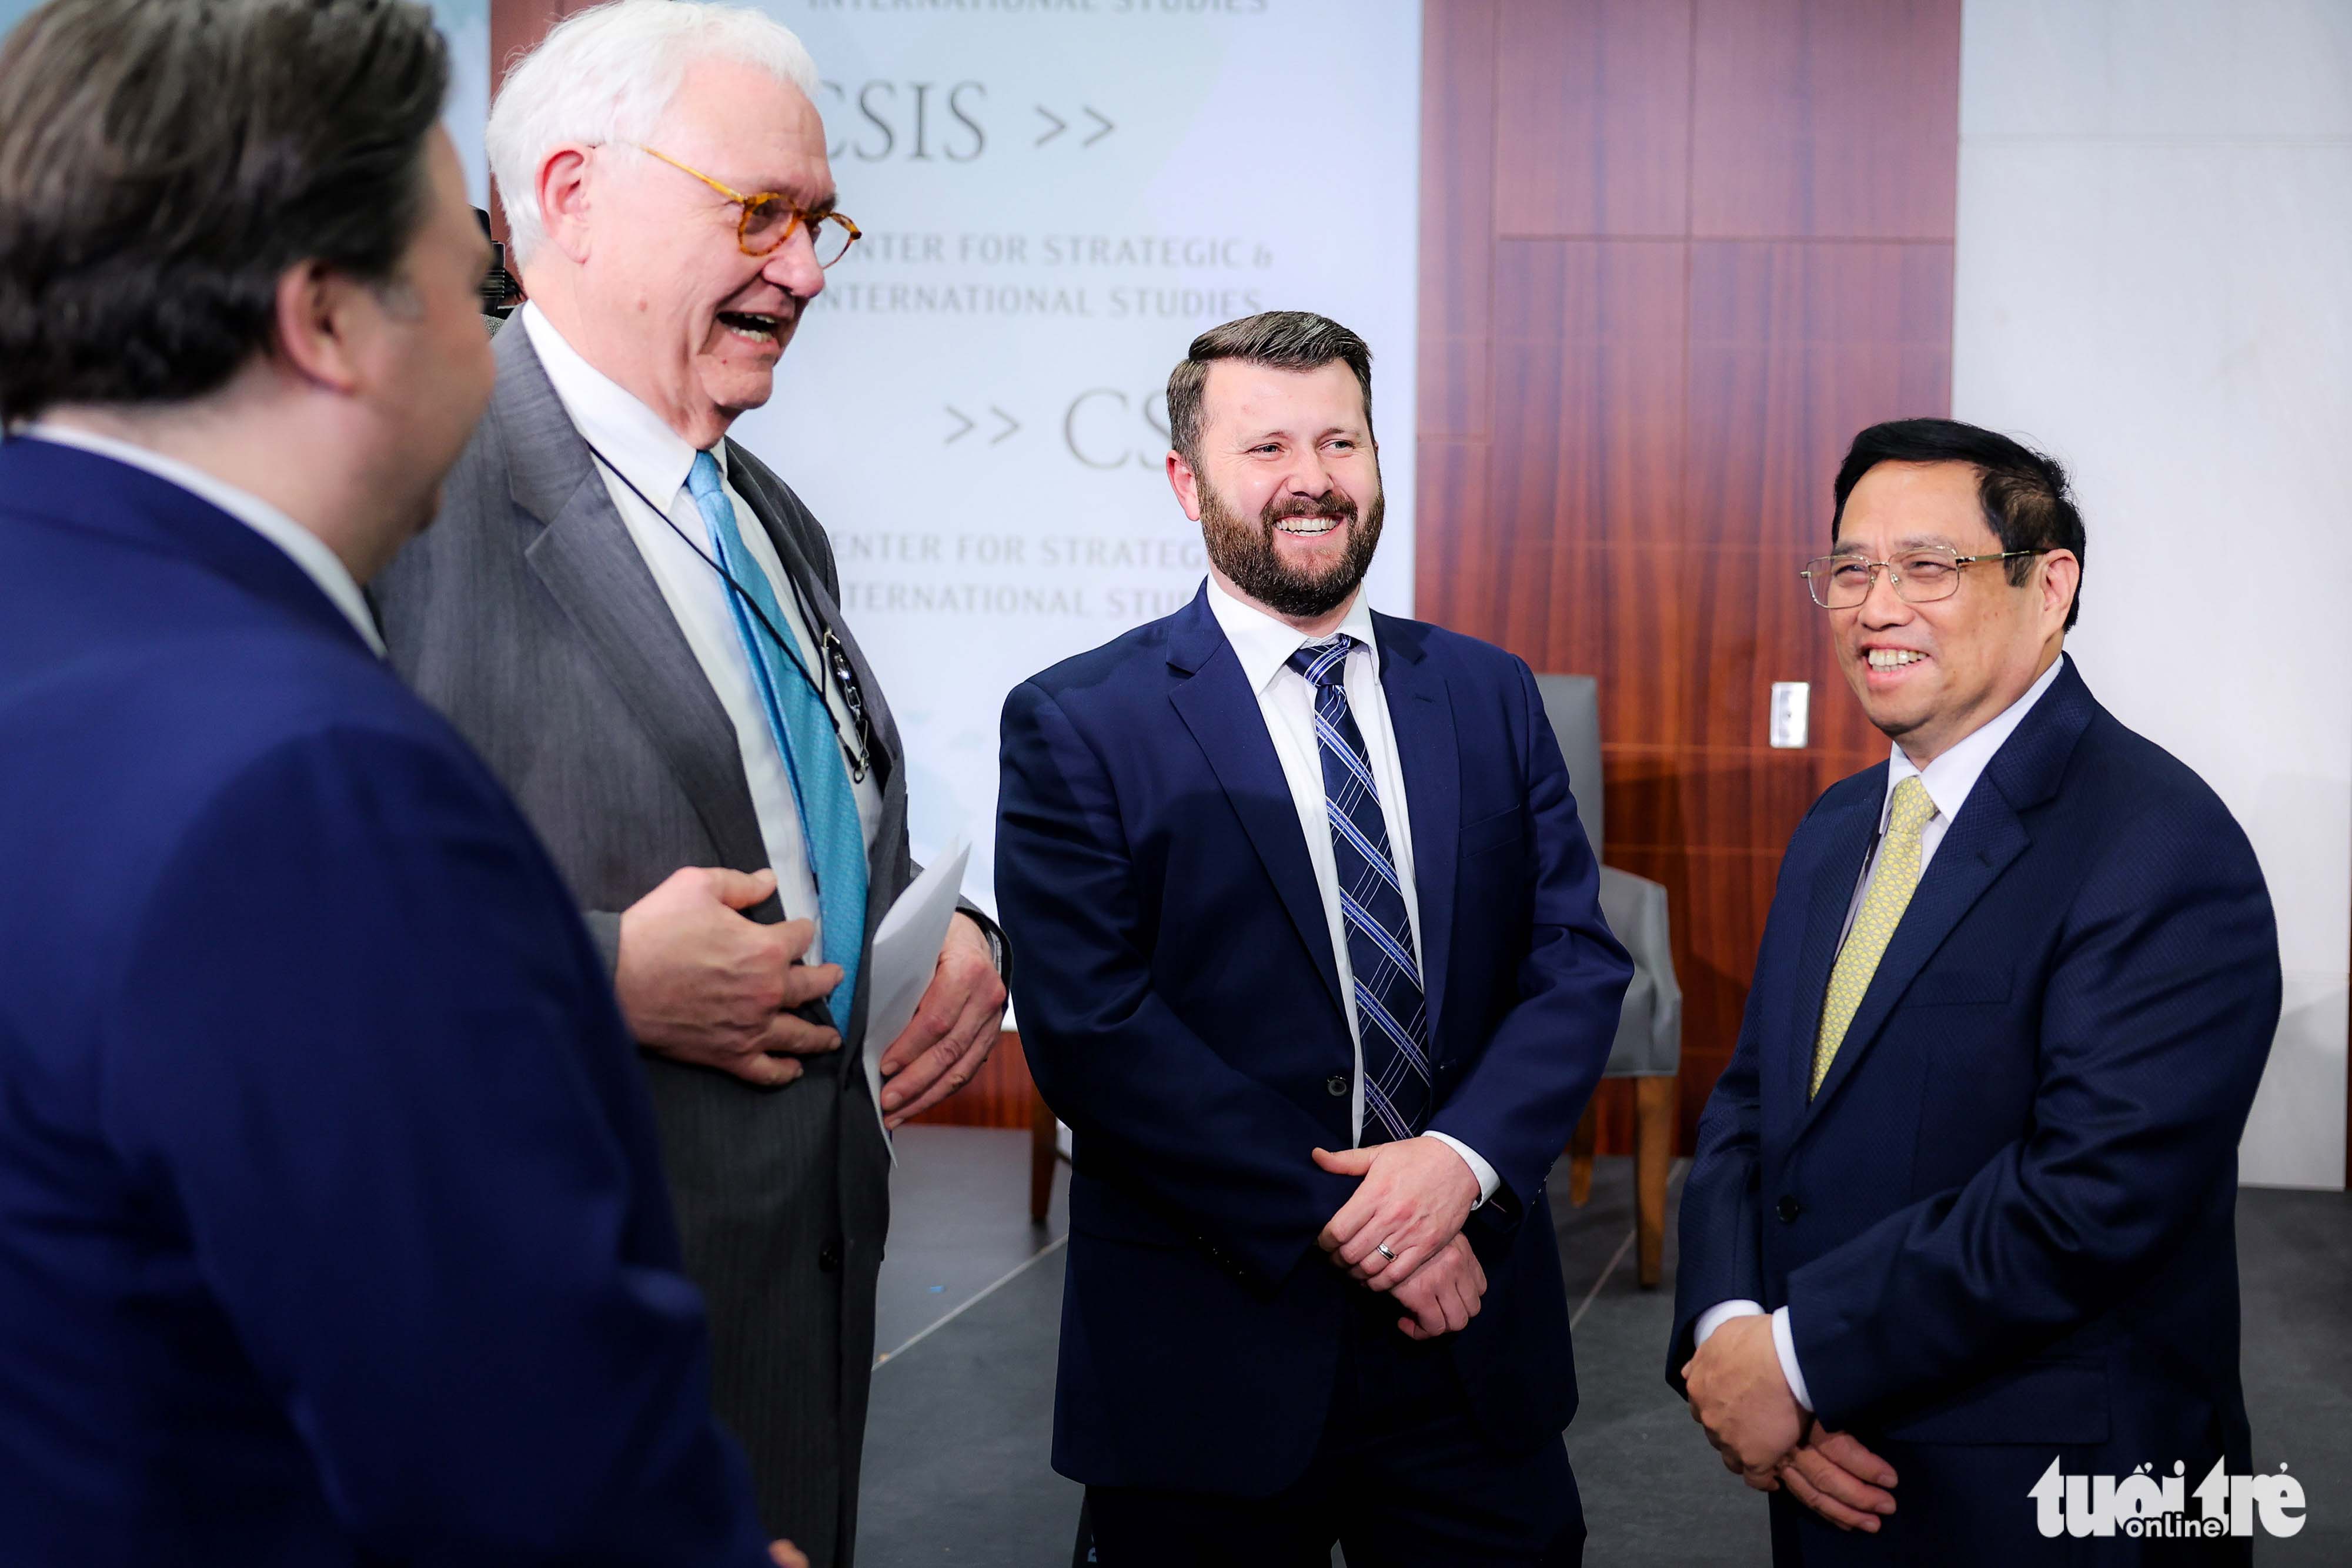 Vietnamese Prime Minister Pham Minh Chinh (R) talks with John Hamre (L,2nd), president and CEO of the CSIS, in Washington, D.C., May 11, 2022. Photo: Nguyen Khanh / Tuoi Tre